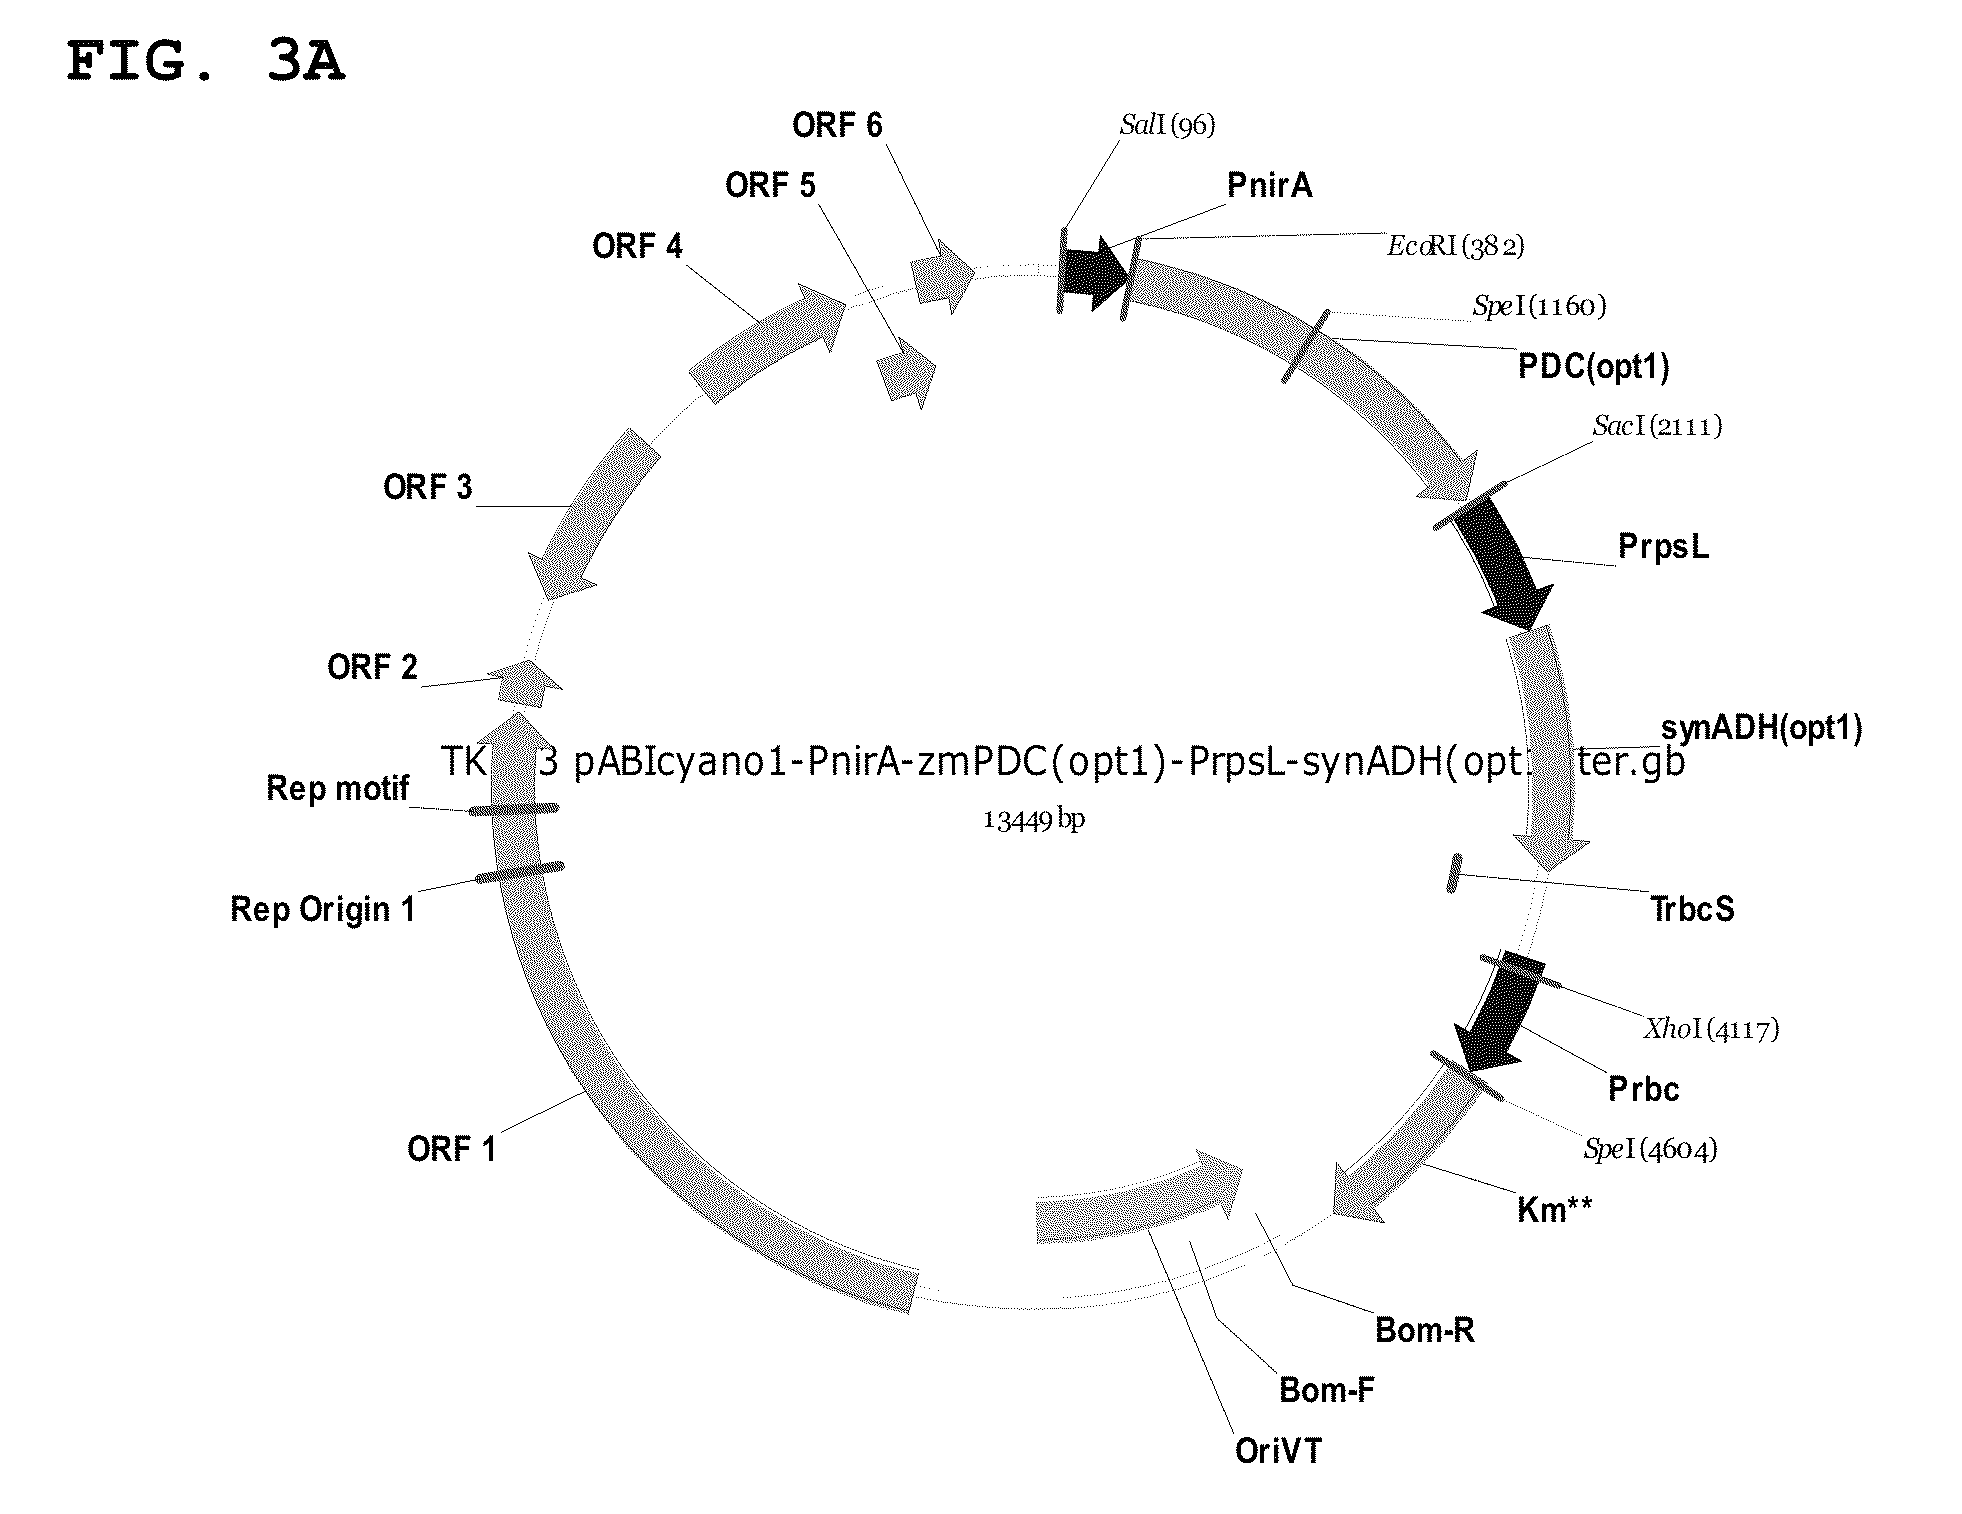 Metabolically enhanced cyanobacterial cell for the production of ethanol